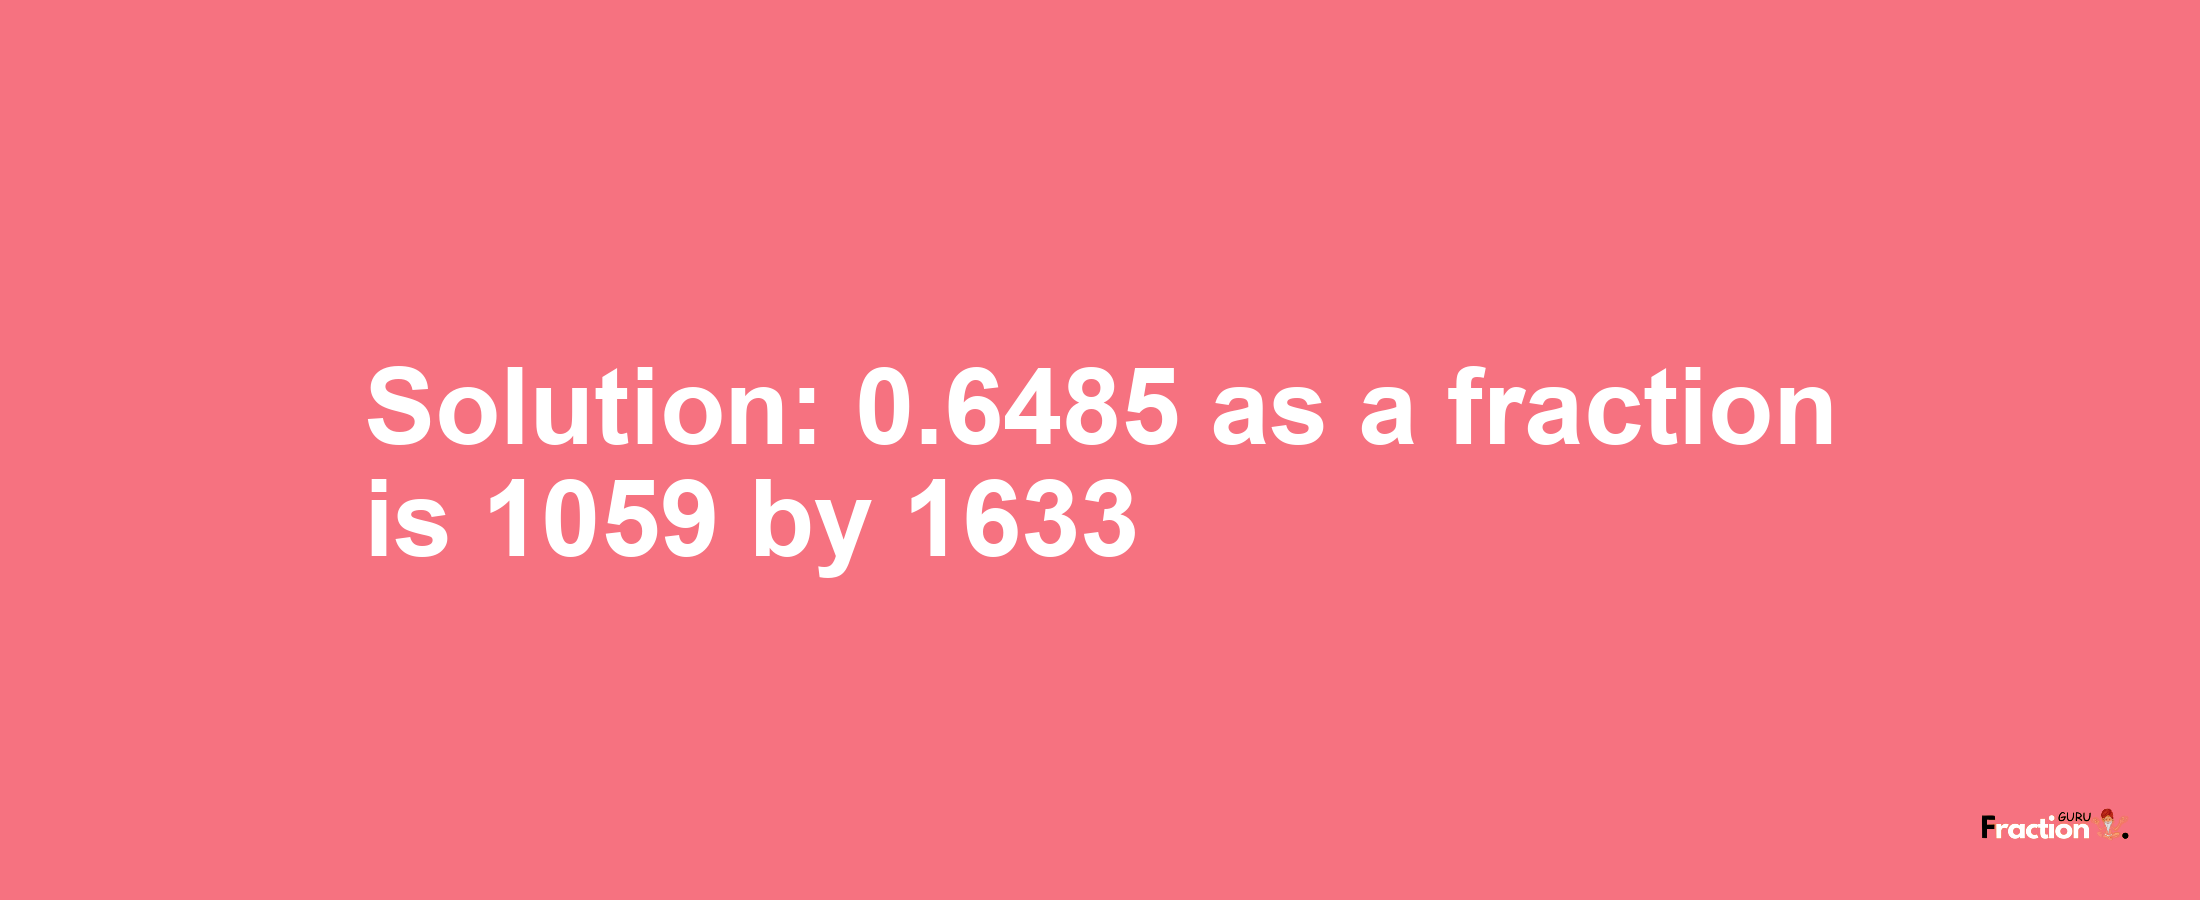 Solution:0.6485 as a fraction is 1059/1633